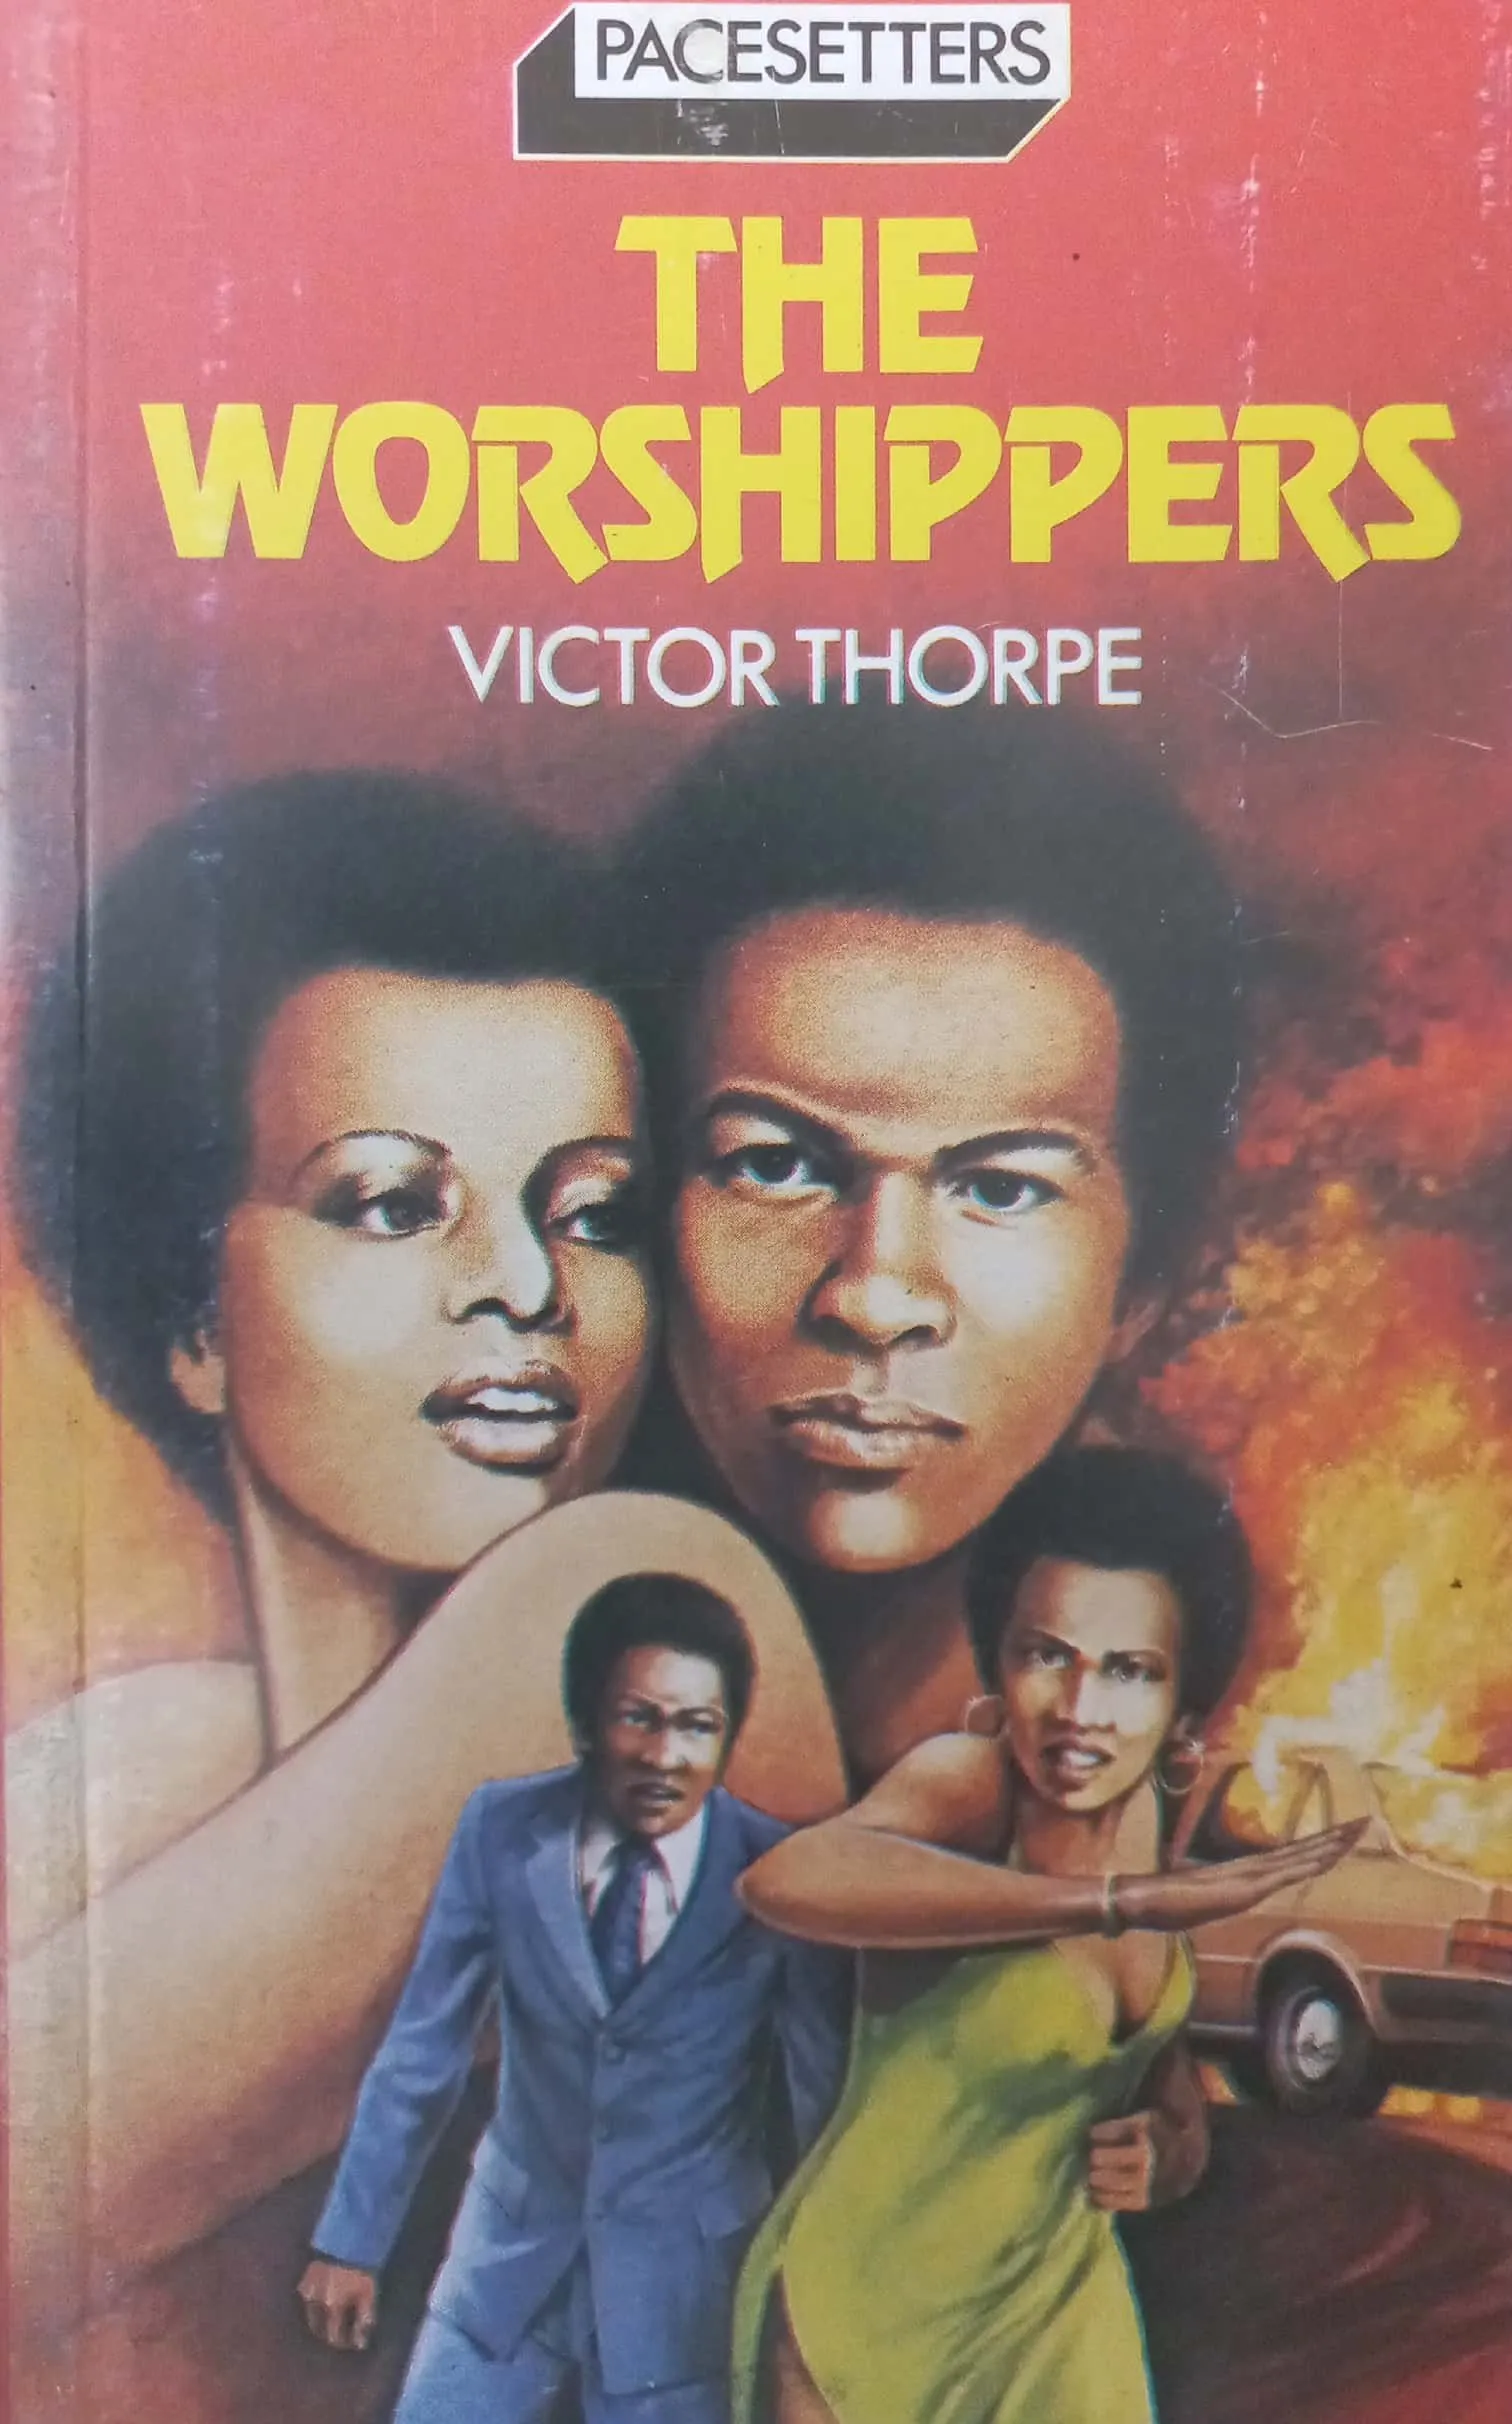 PACESETTERS: THE WORSHIPPERS